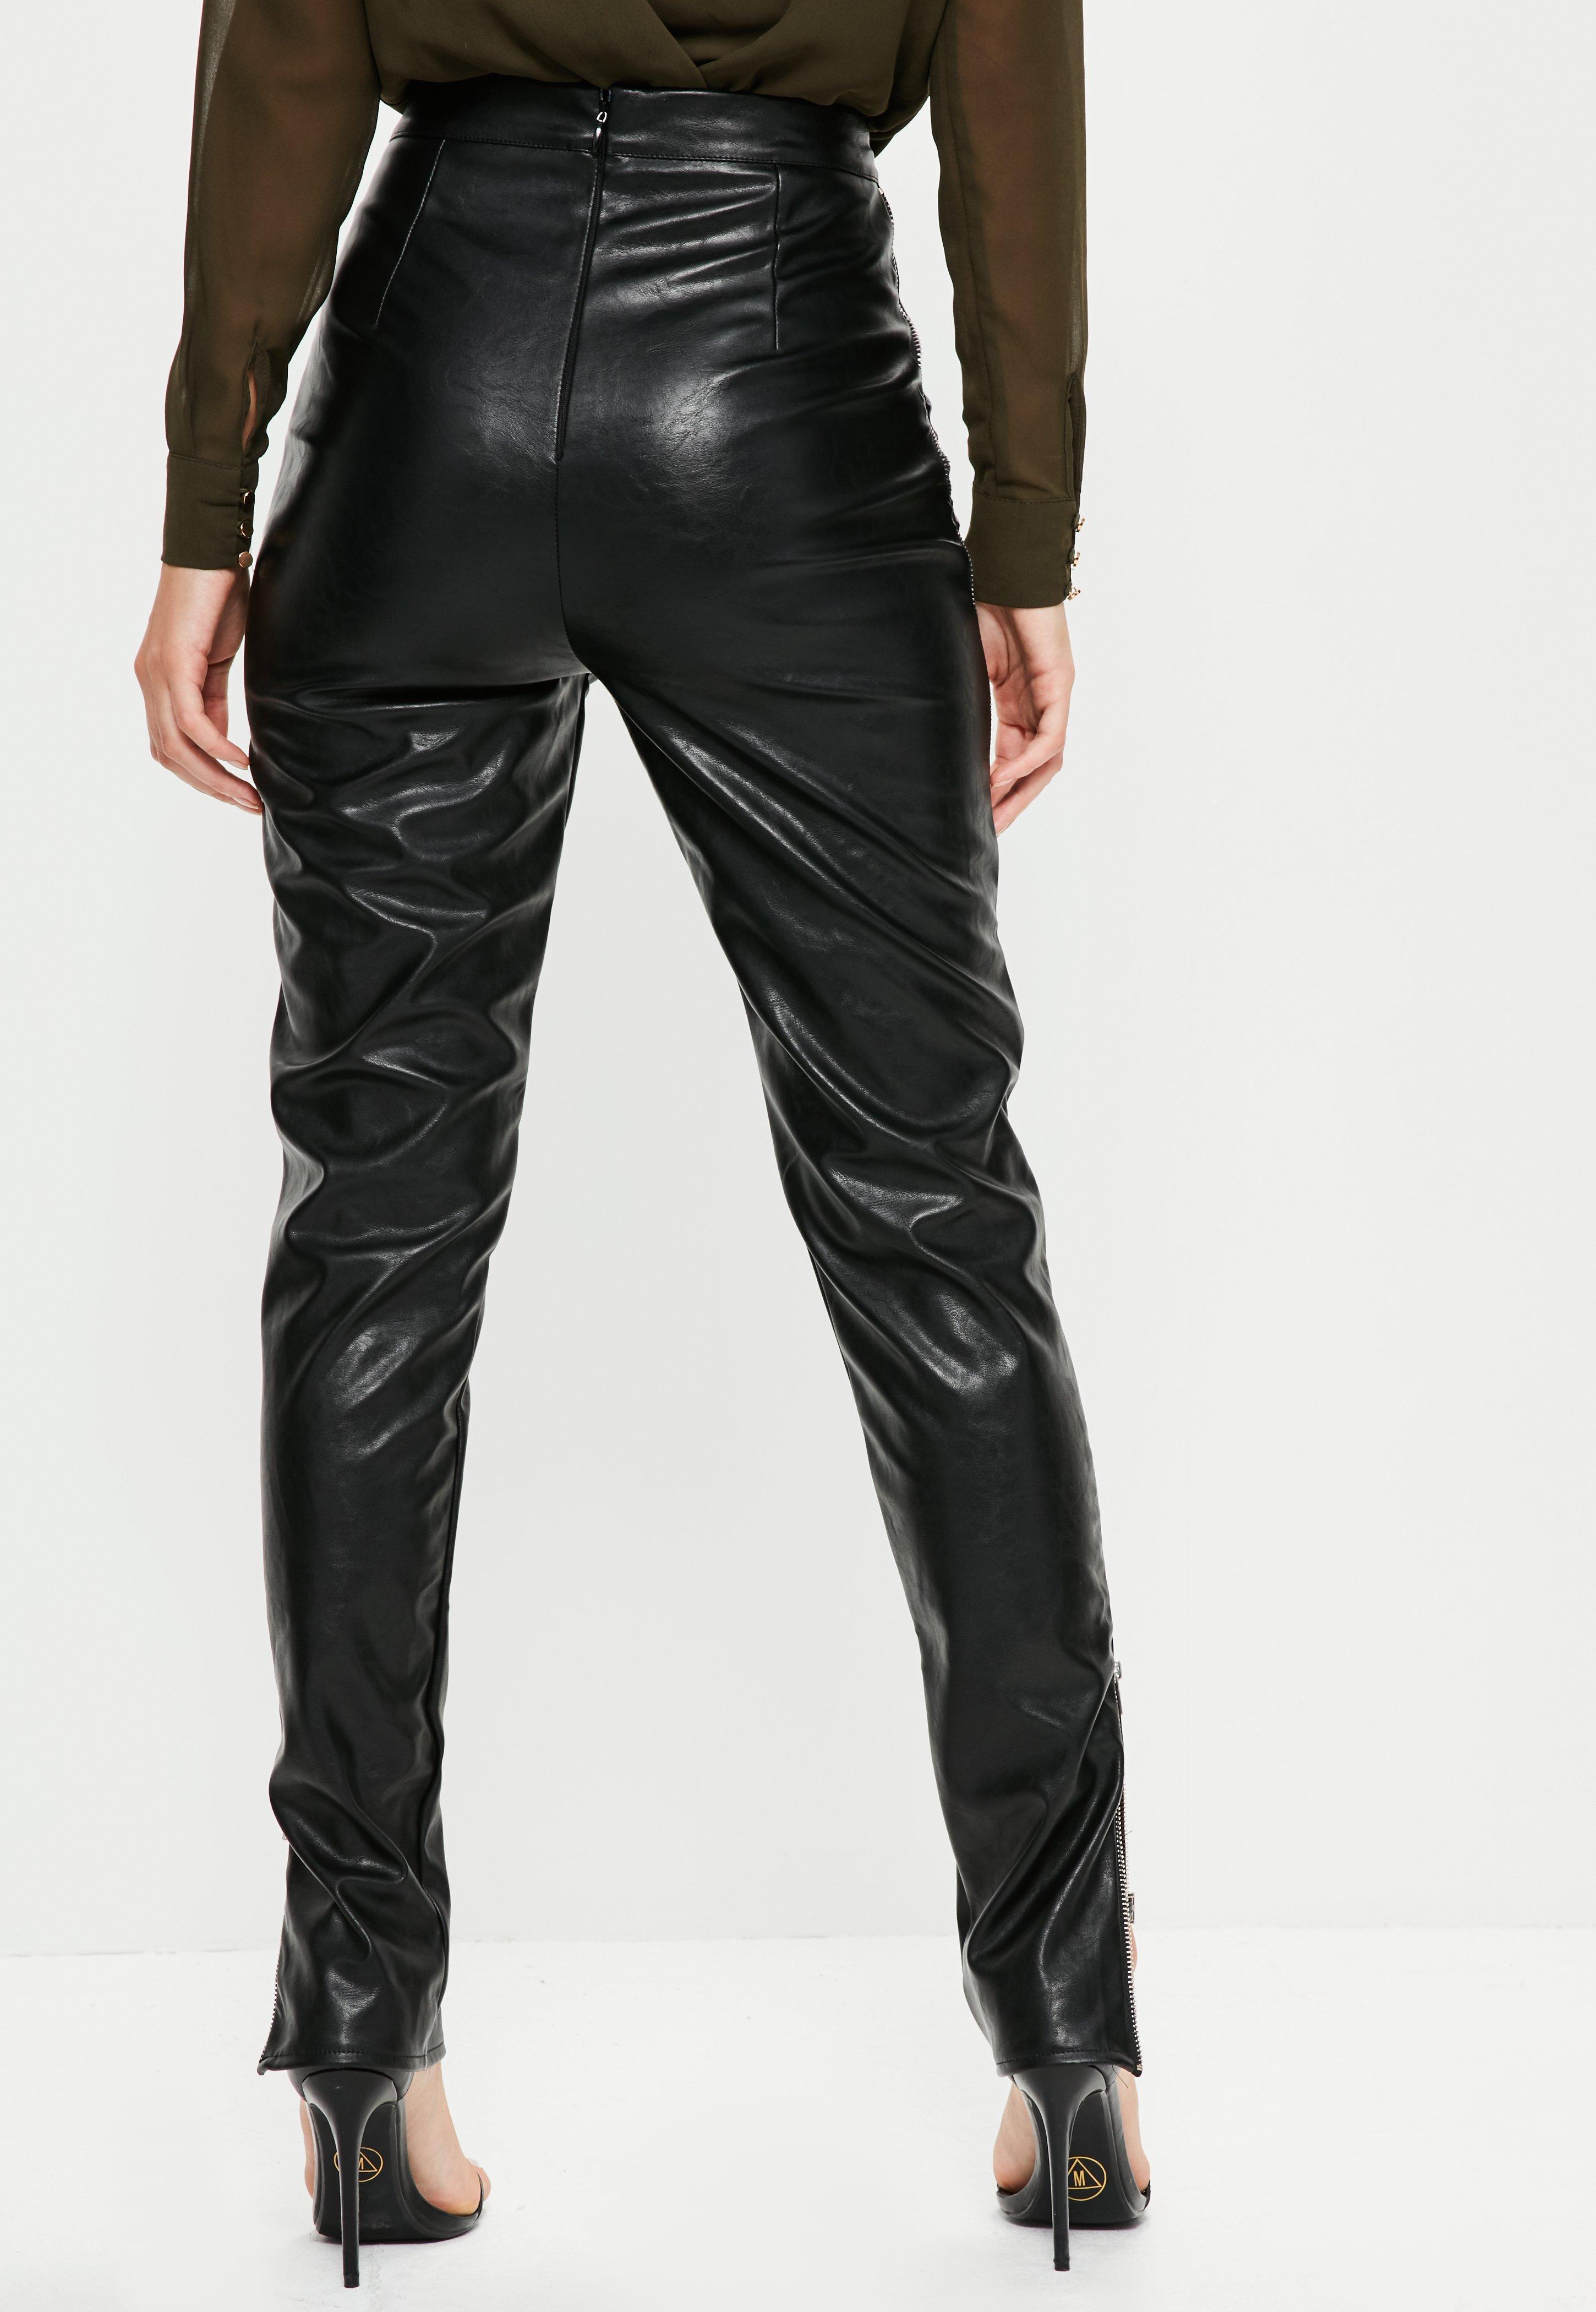 Missguided Tall Exclusive Black Faux Leather Side Zip Trousers - Lyst